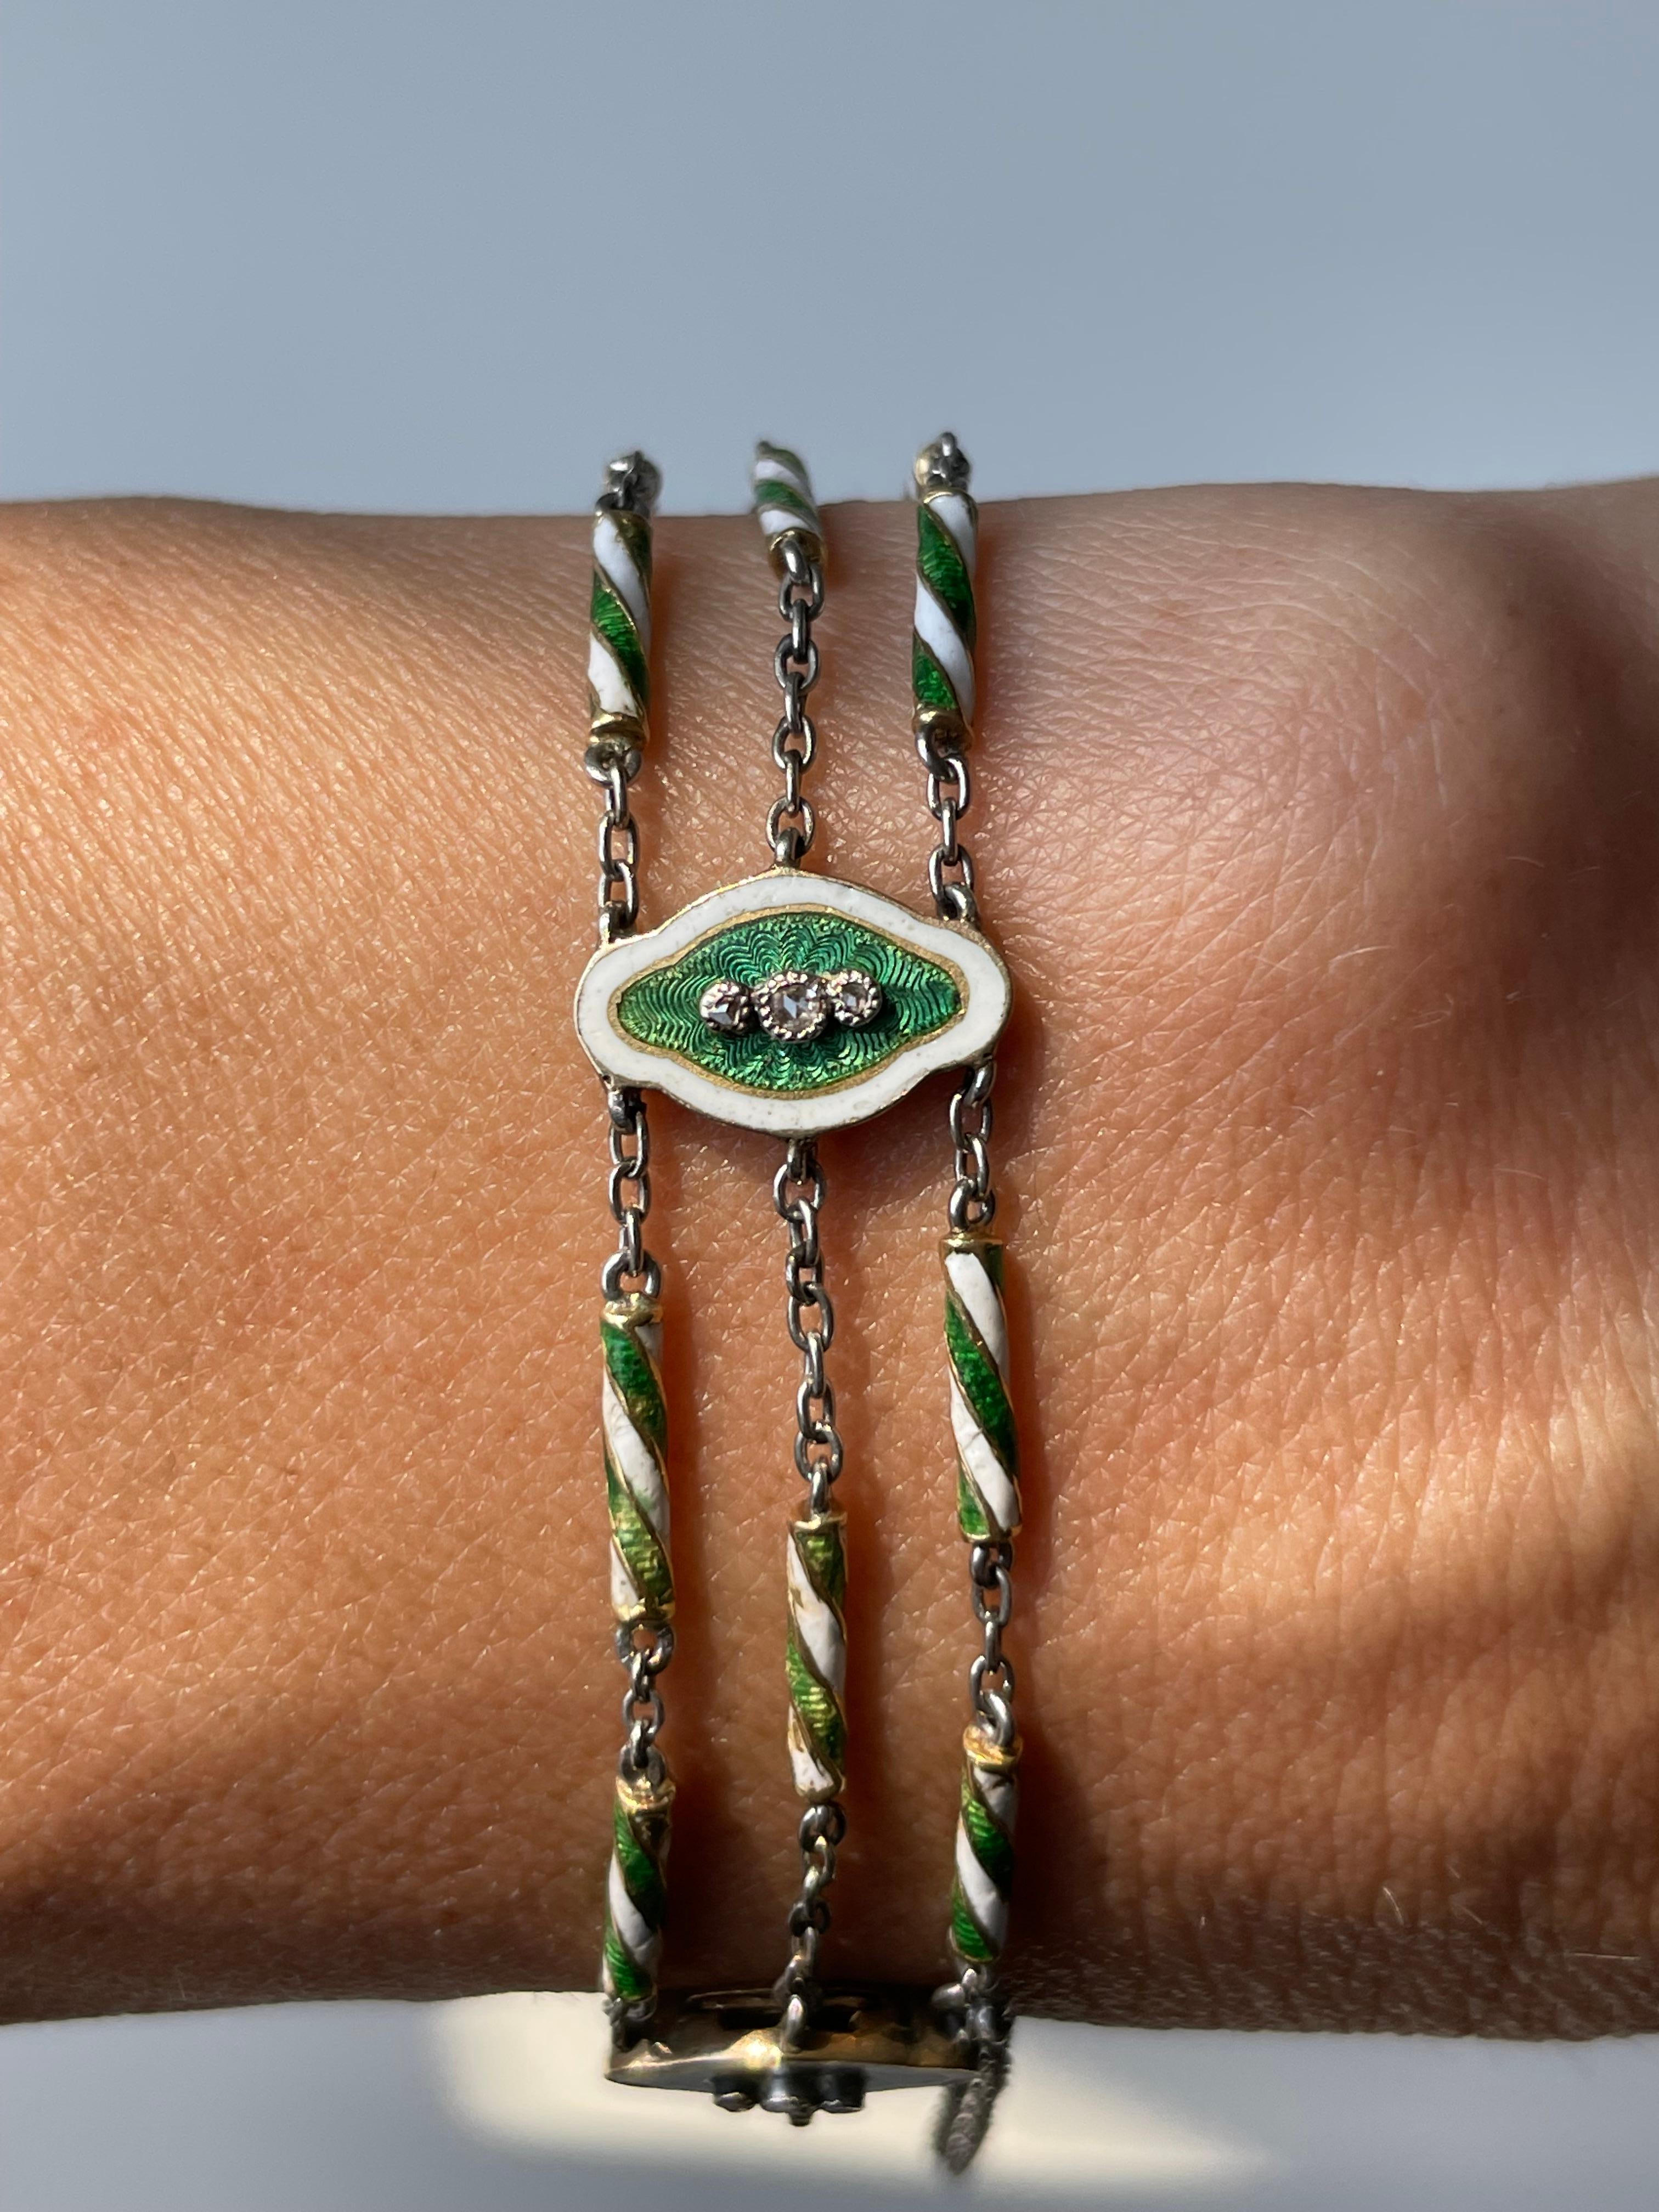 Dating from the Belle Époque era, this precious bracelet by Risler & Carre is comprised of five quatrefoil plaques, decorated with a trio of twinkling rose-cut diamonds mounted on a glossy emerald green guilloche, contained within a white enamel